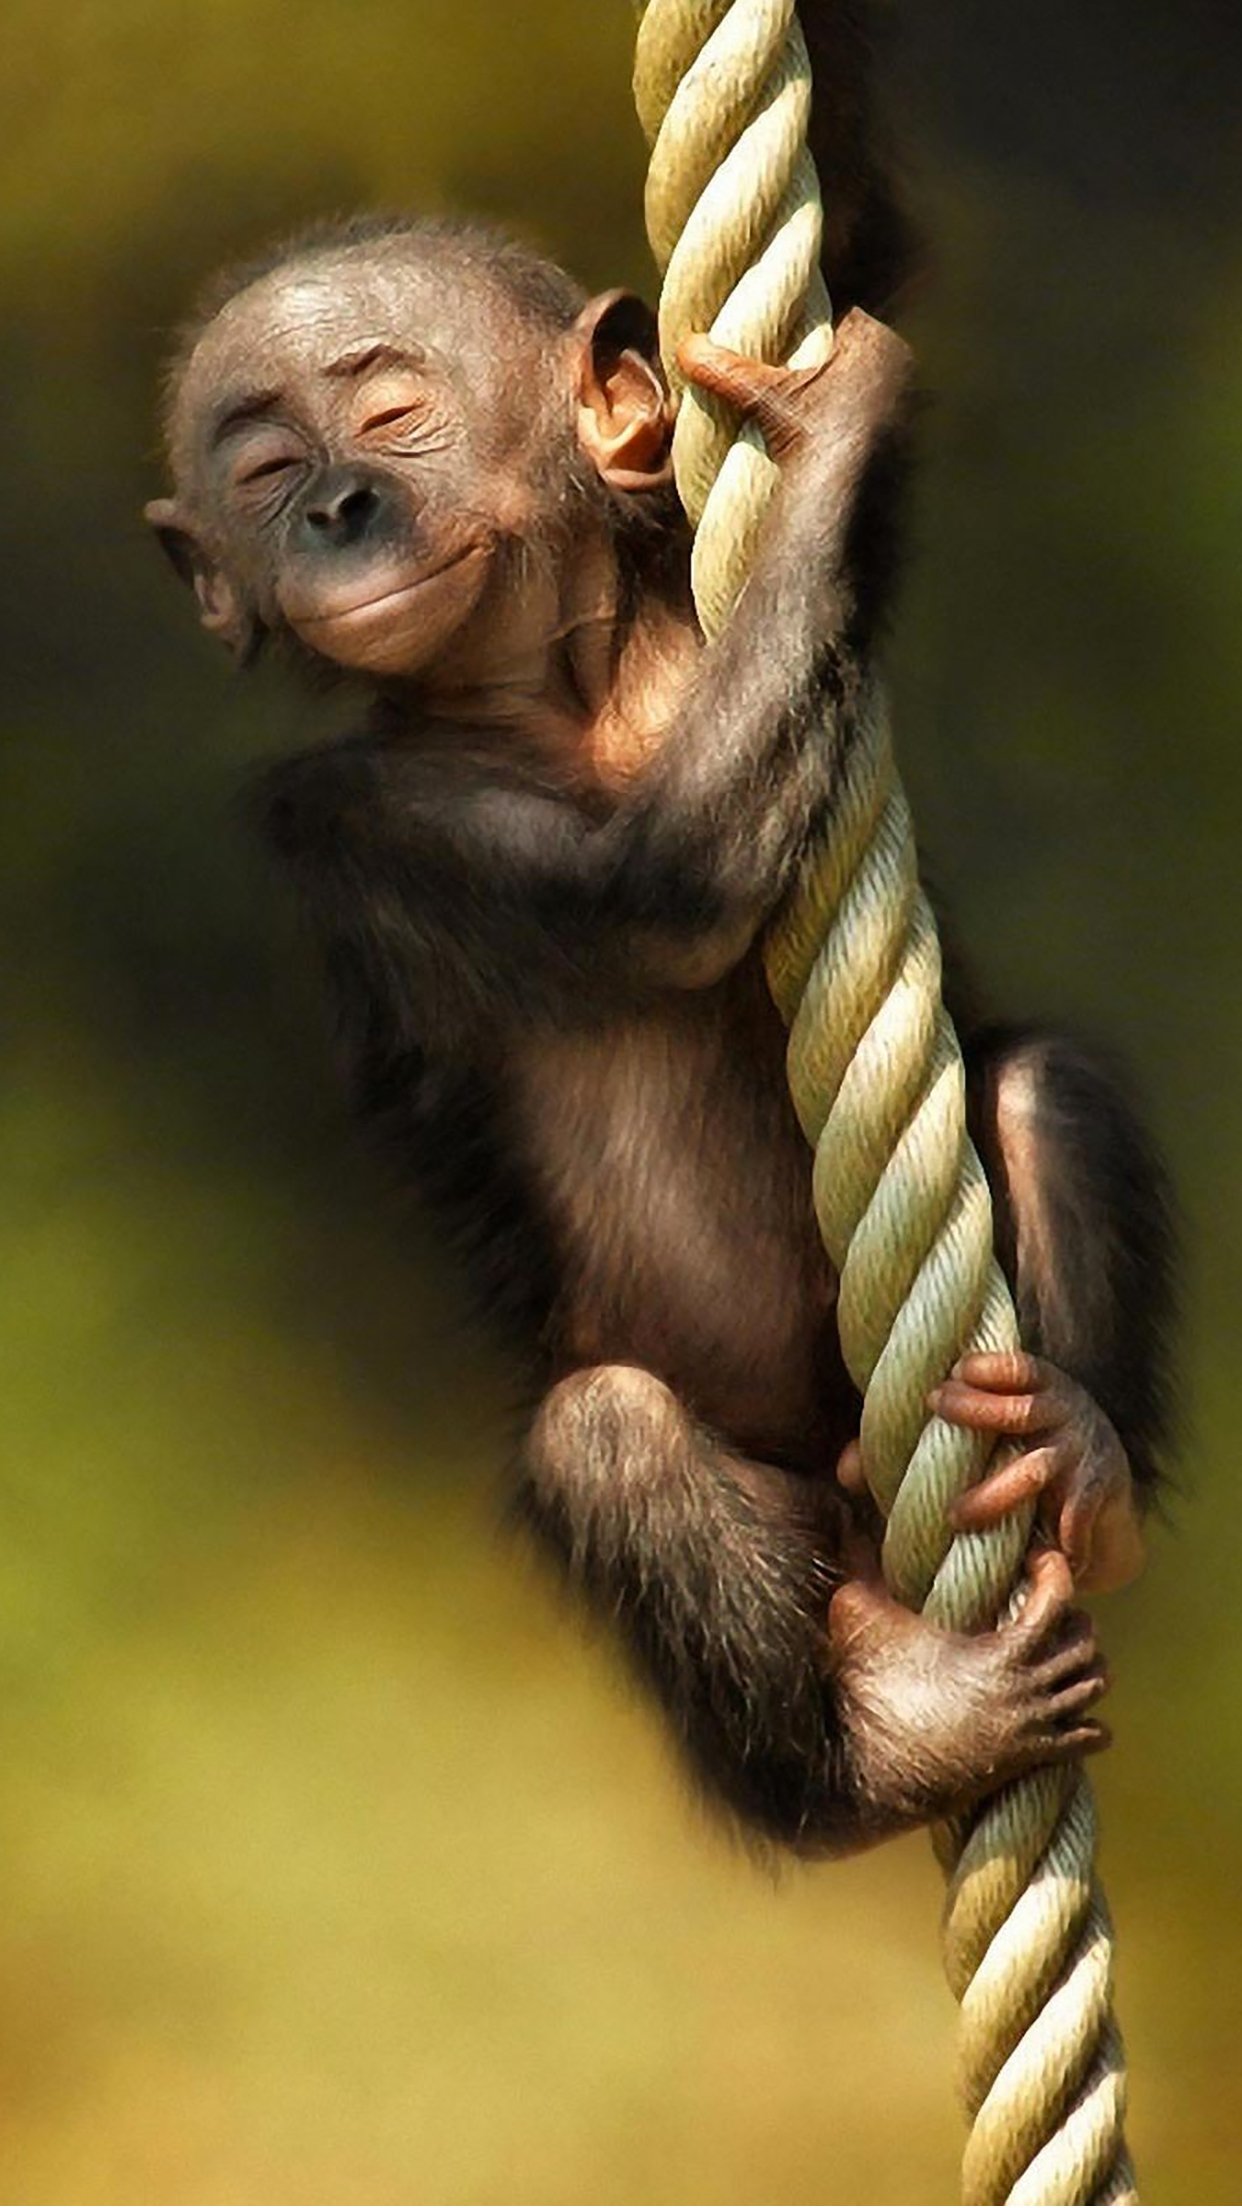 Monkey Smile Wallpaper for iPhone Pro Max, X, 6